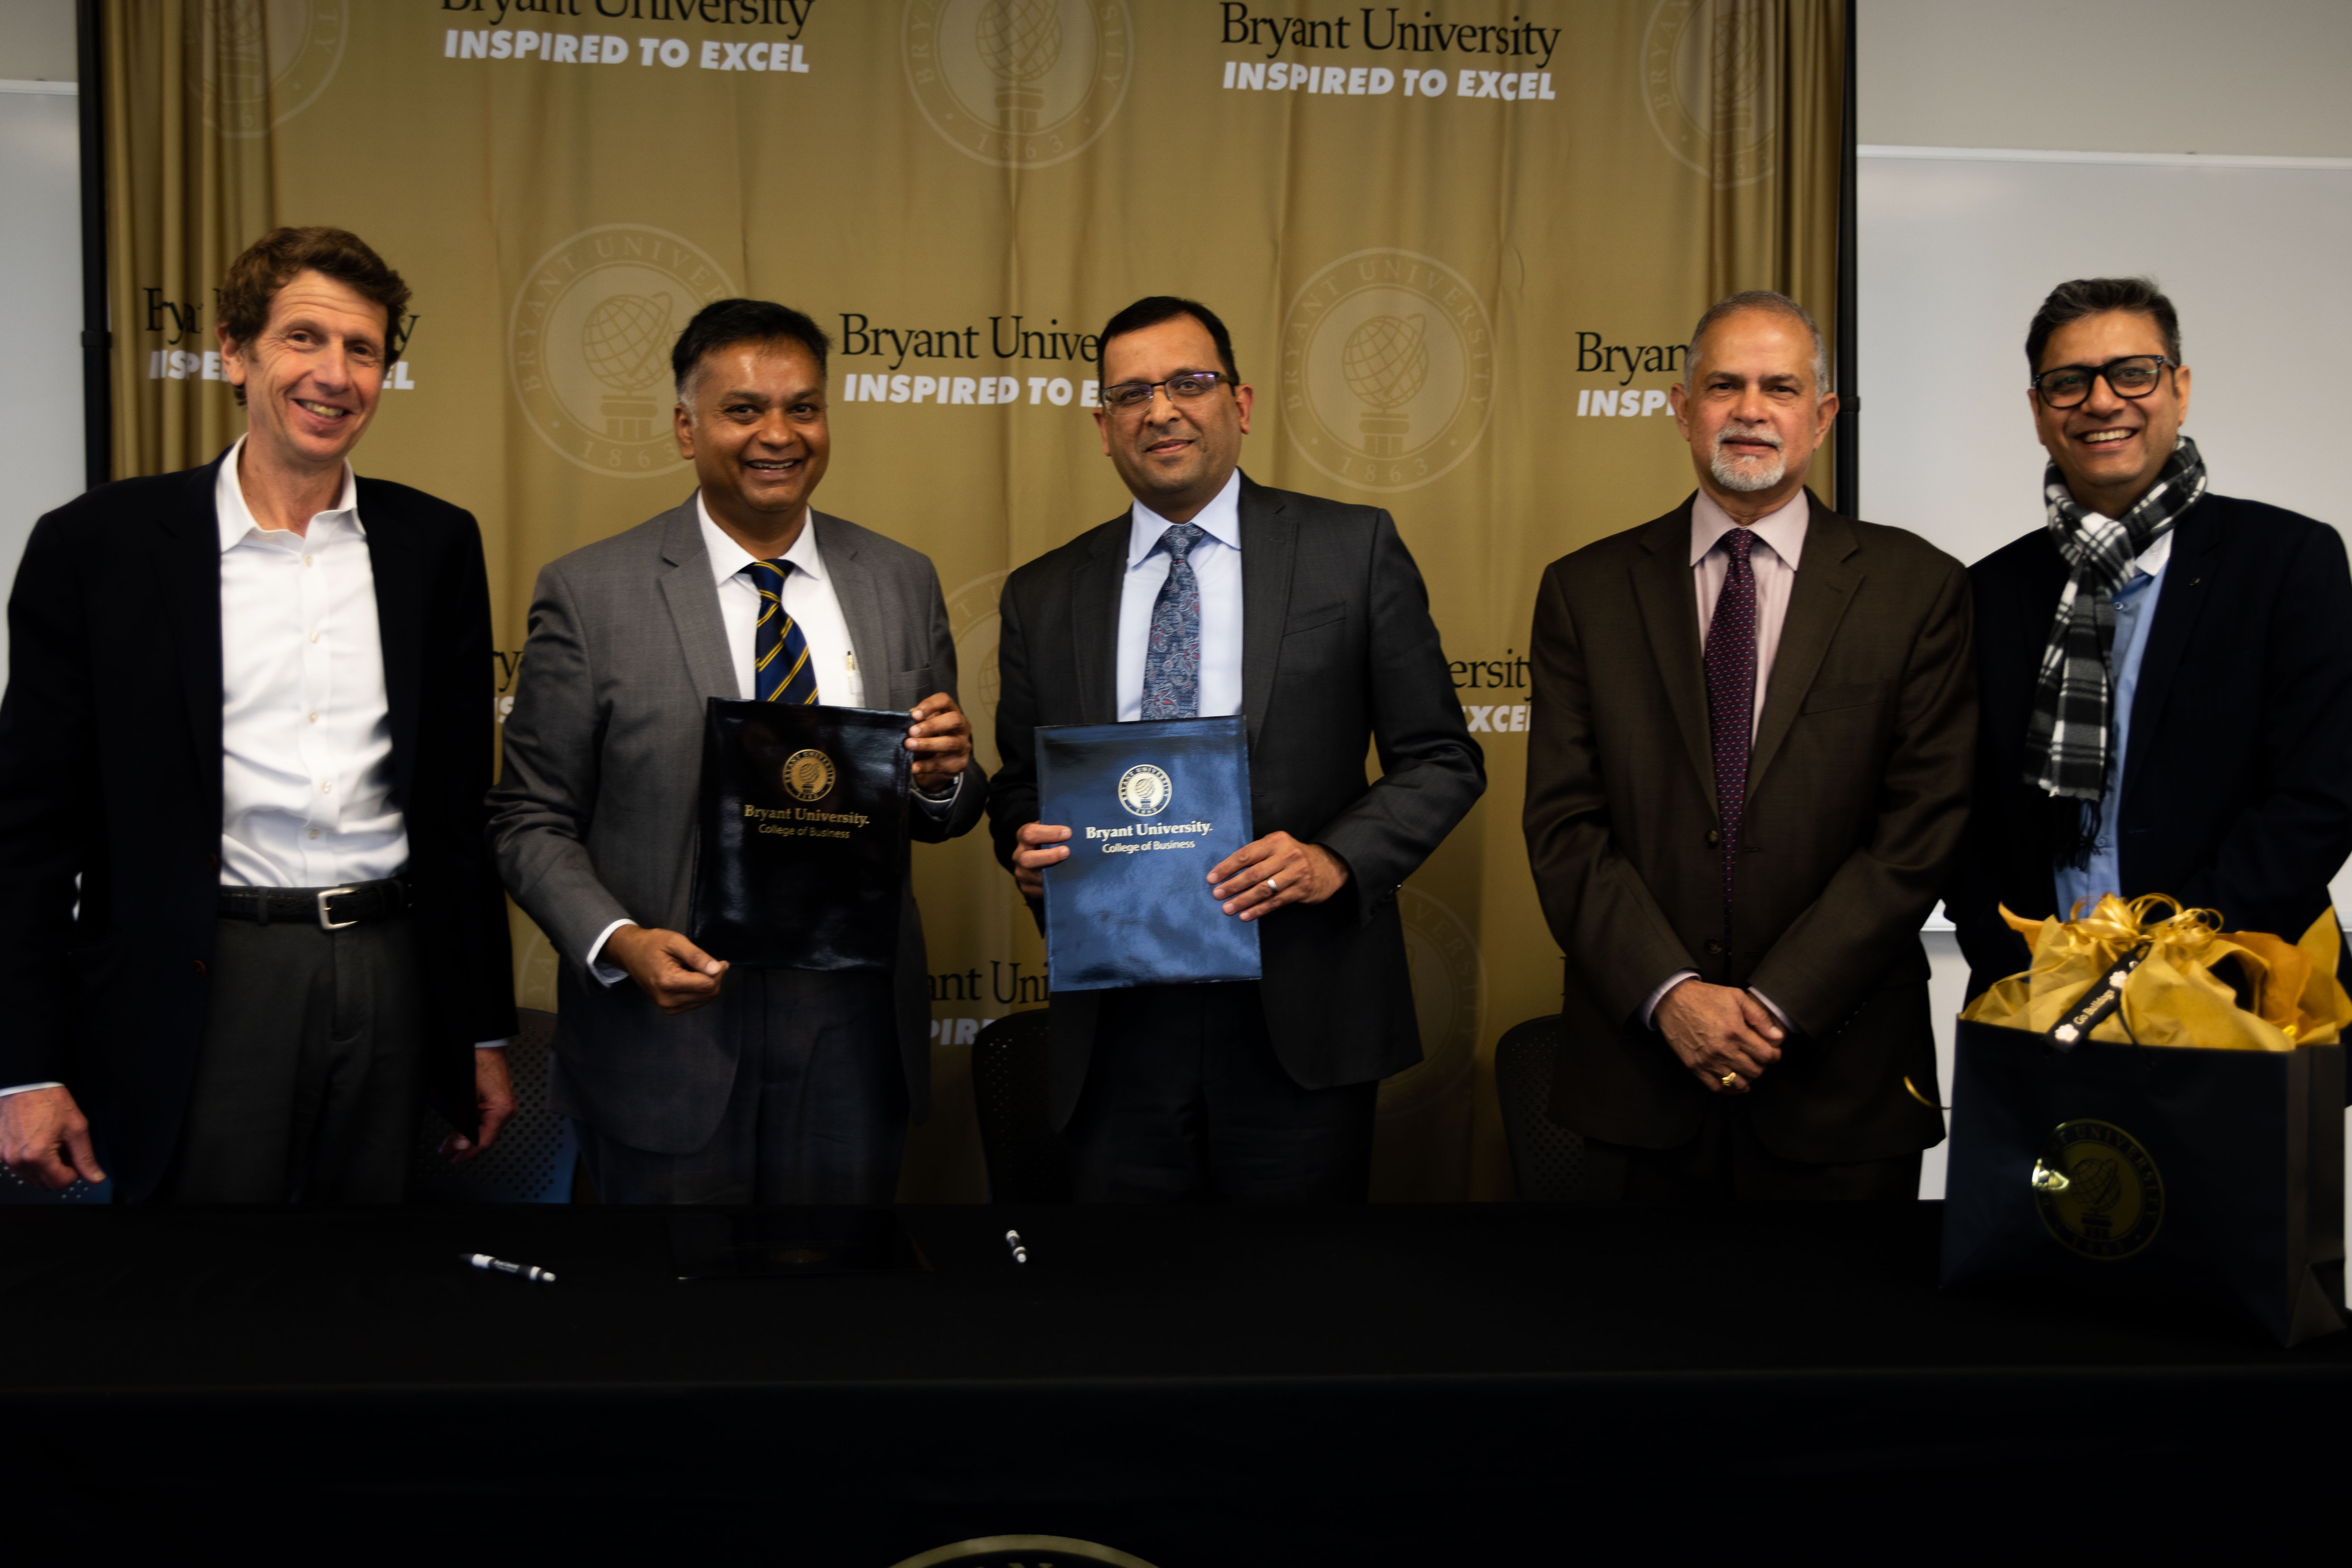 MoU signing on Bryant campus